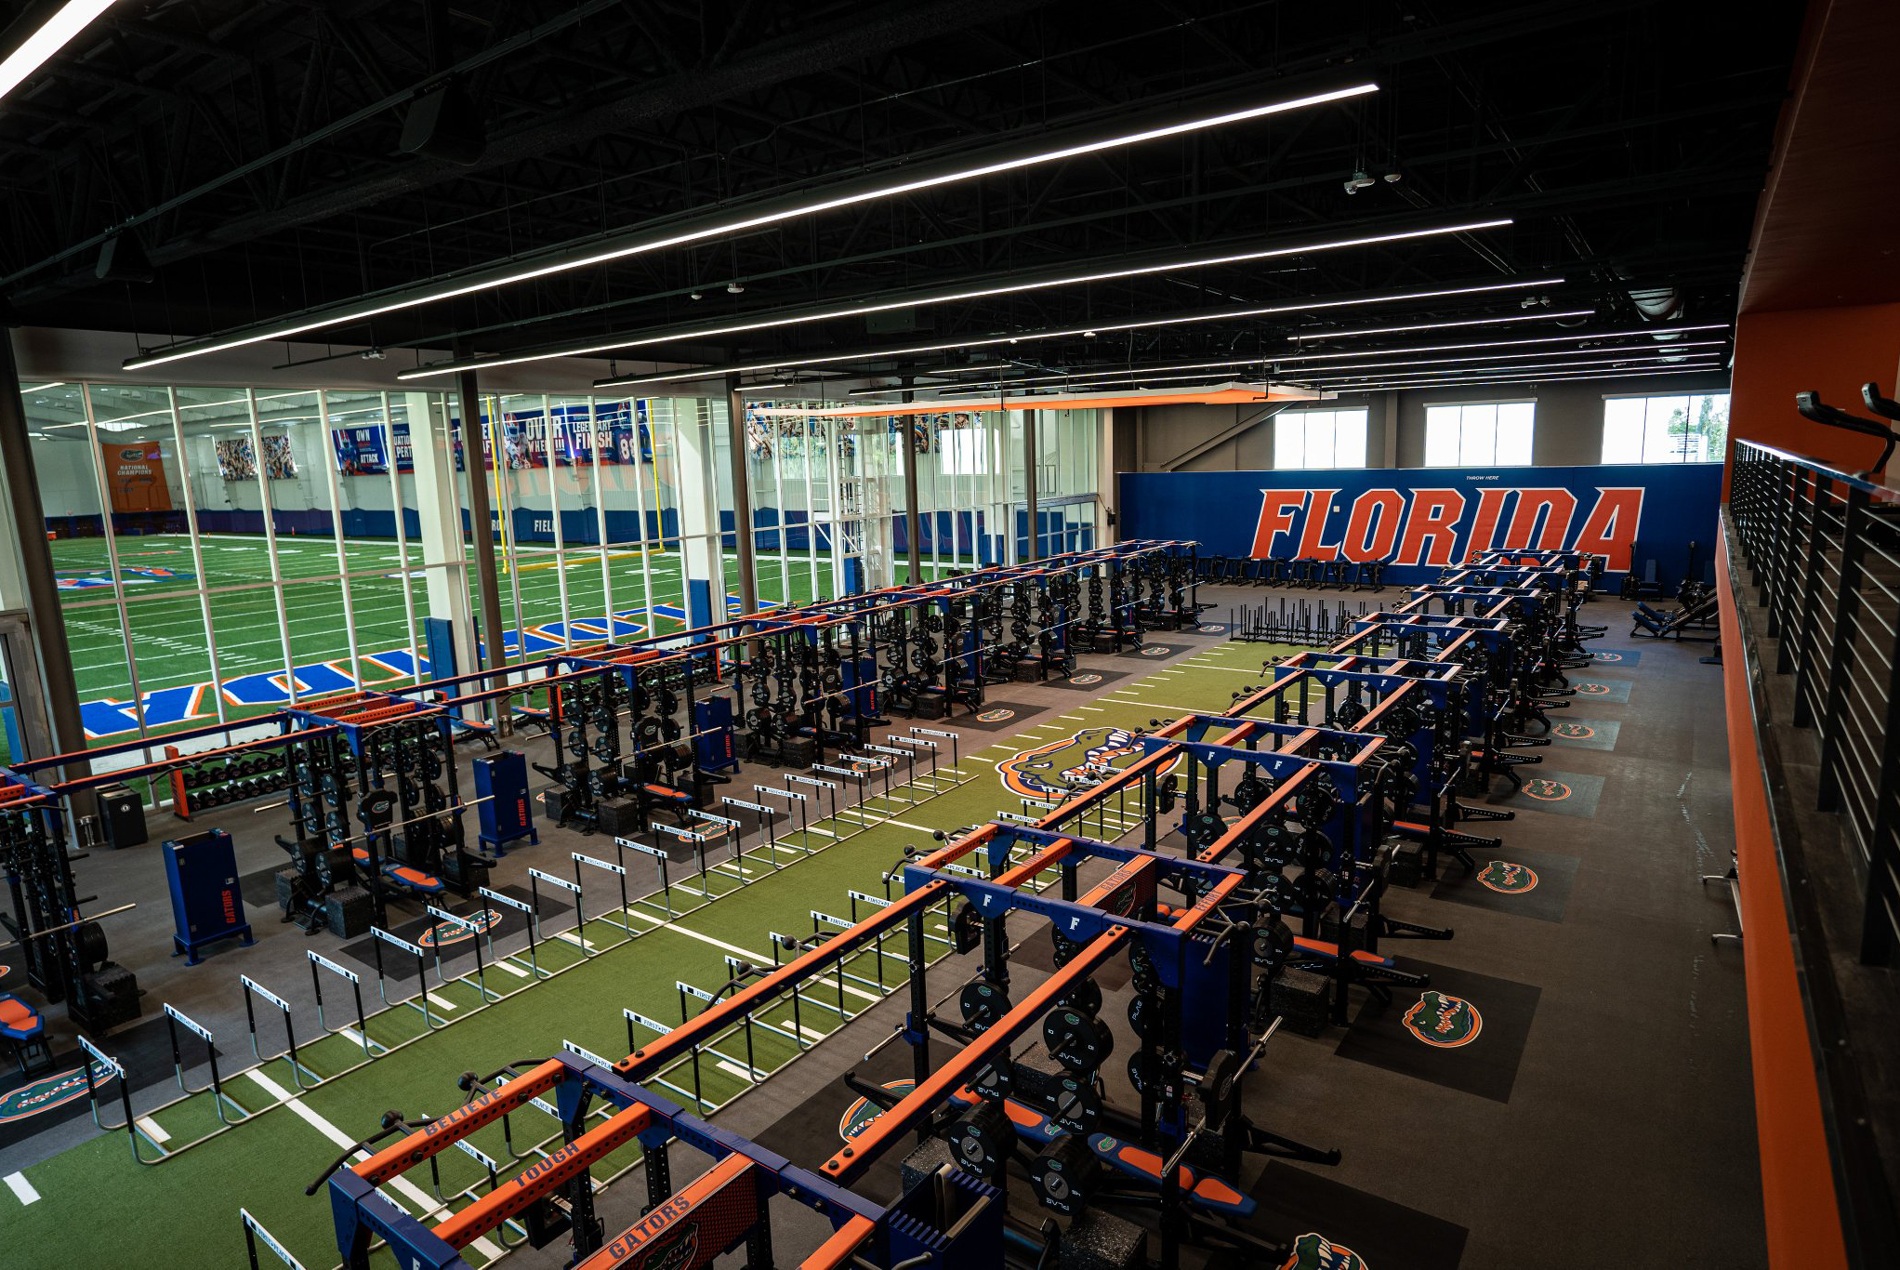 5 Tips for Designing Impactful College Football Training Facilities - HOK